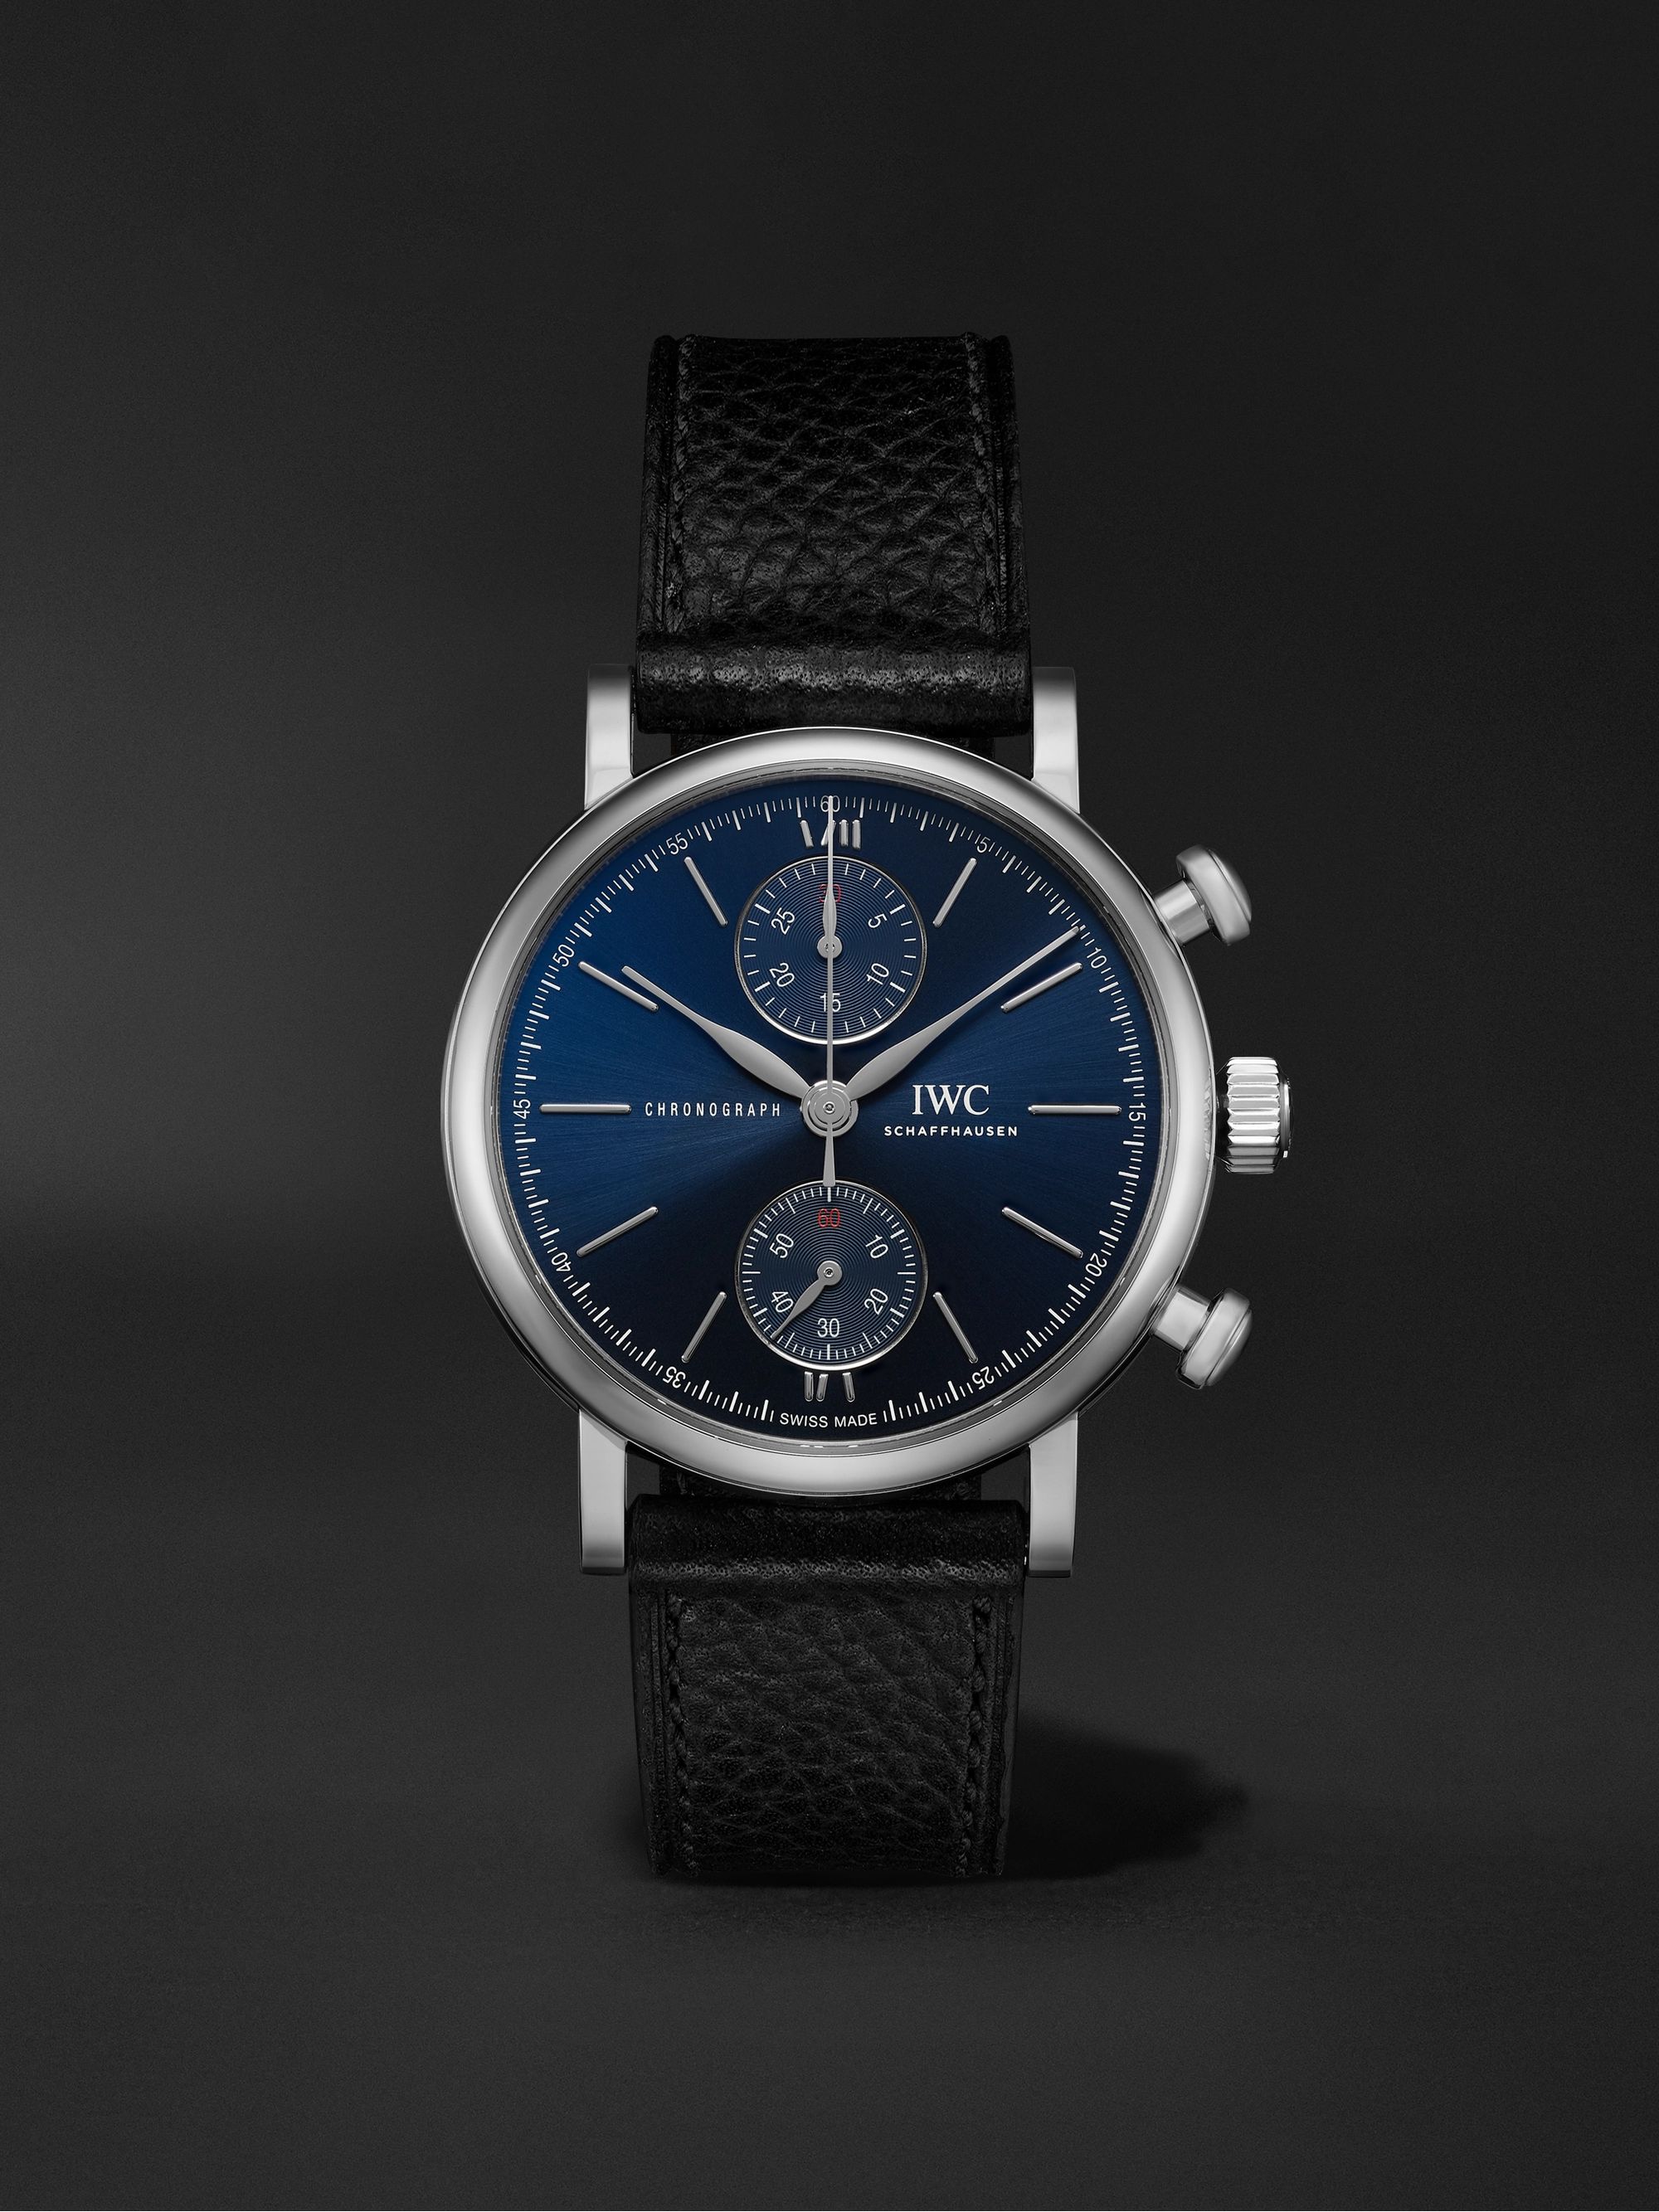 IWC SCHAFFHAUSEN + Laureus Sport for Good Portofino 39 Limited Edition Automatic Chronograph 39mm Stainless Steel and Leather Watch, Ref. No. IW391408